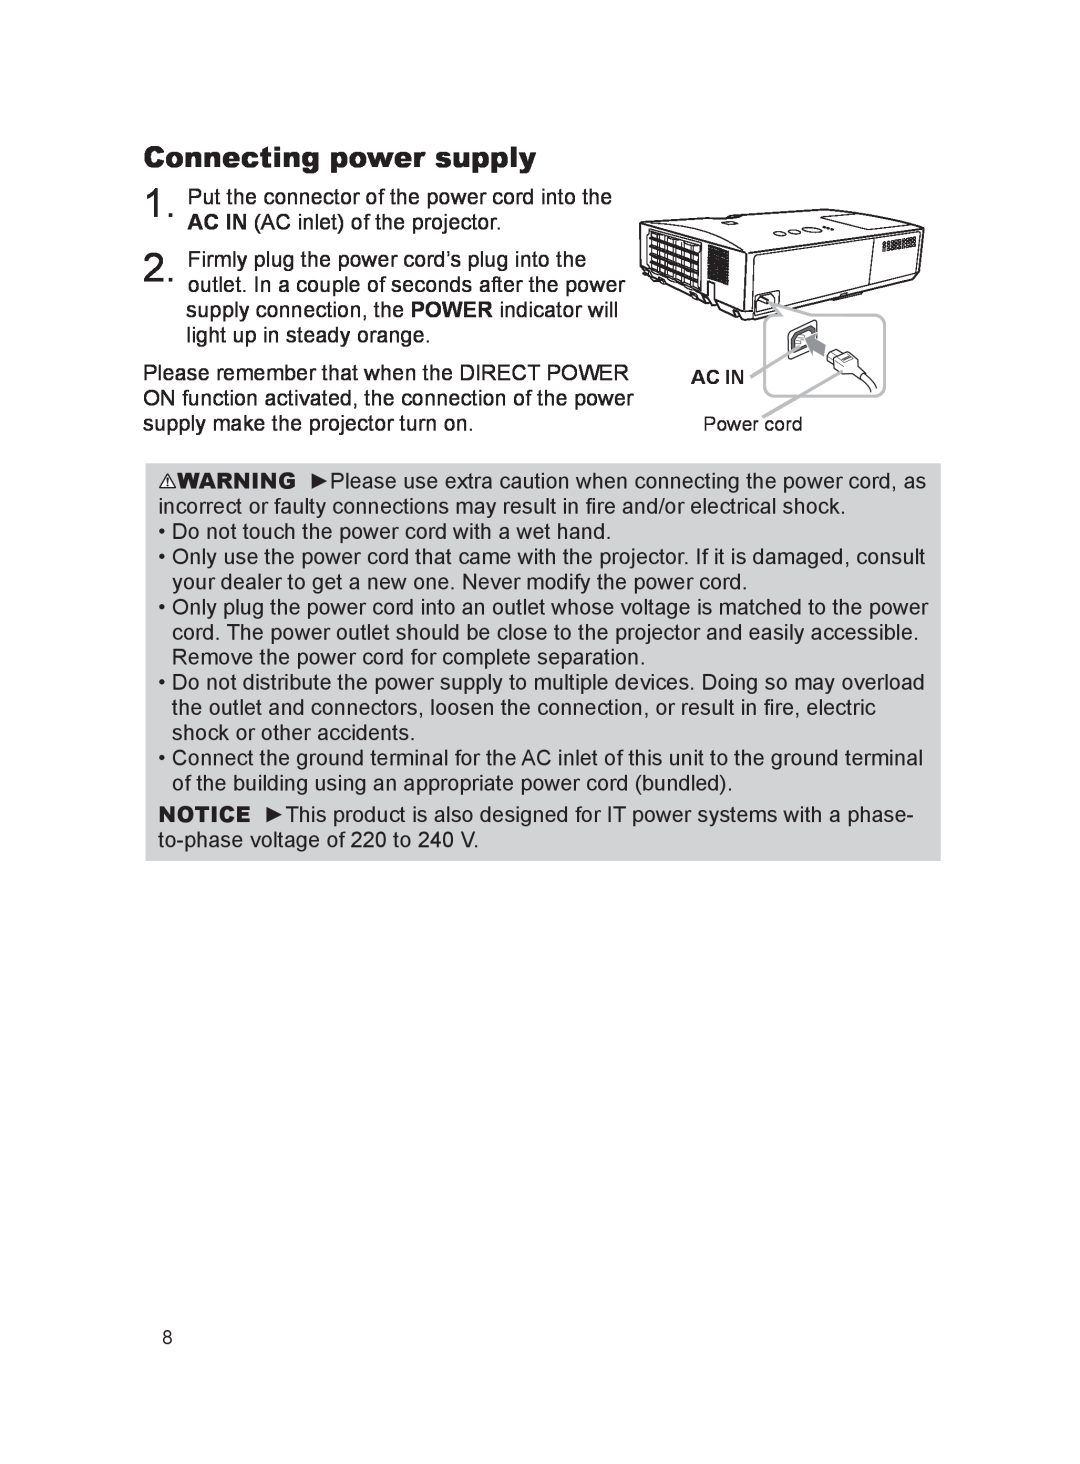 Dukane 8793h user manual Connecting power supply 